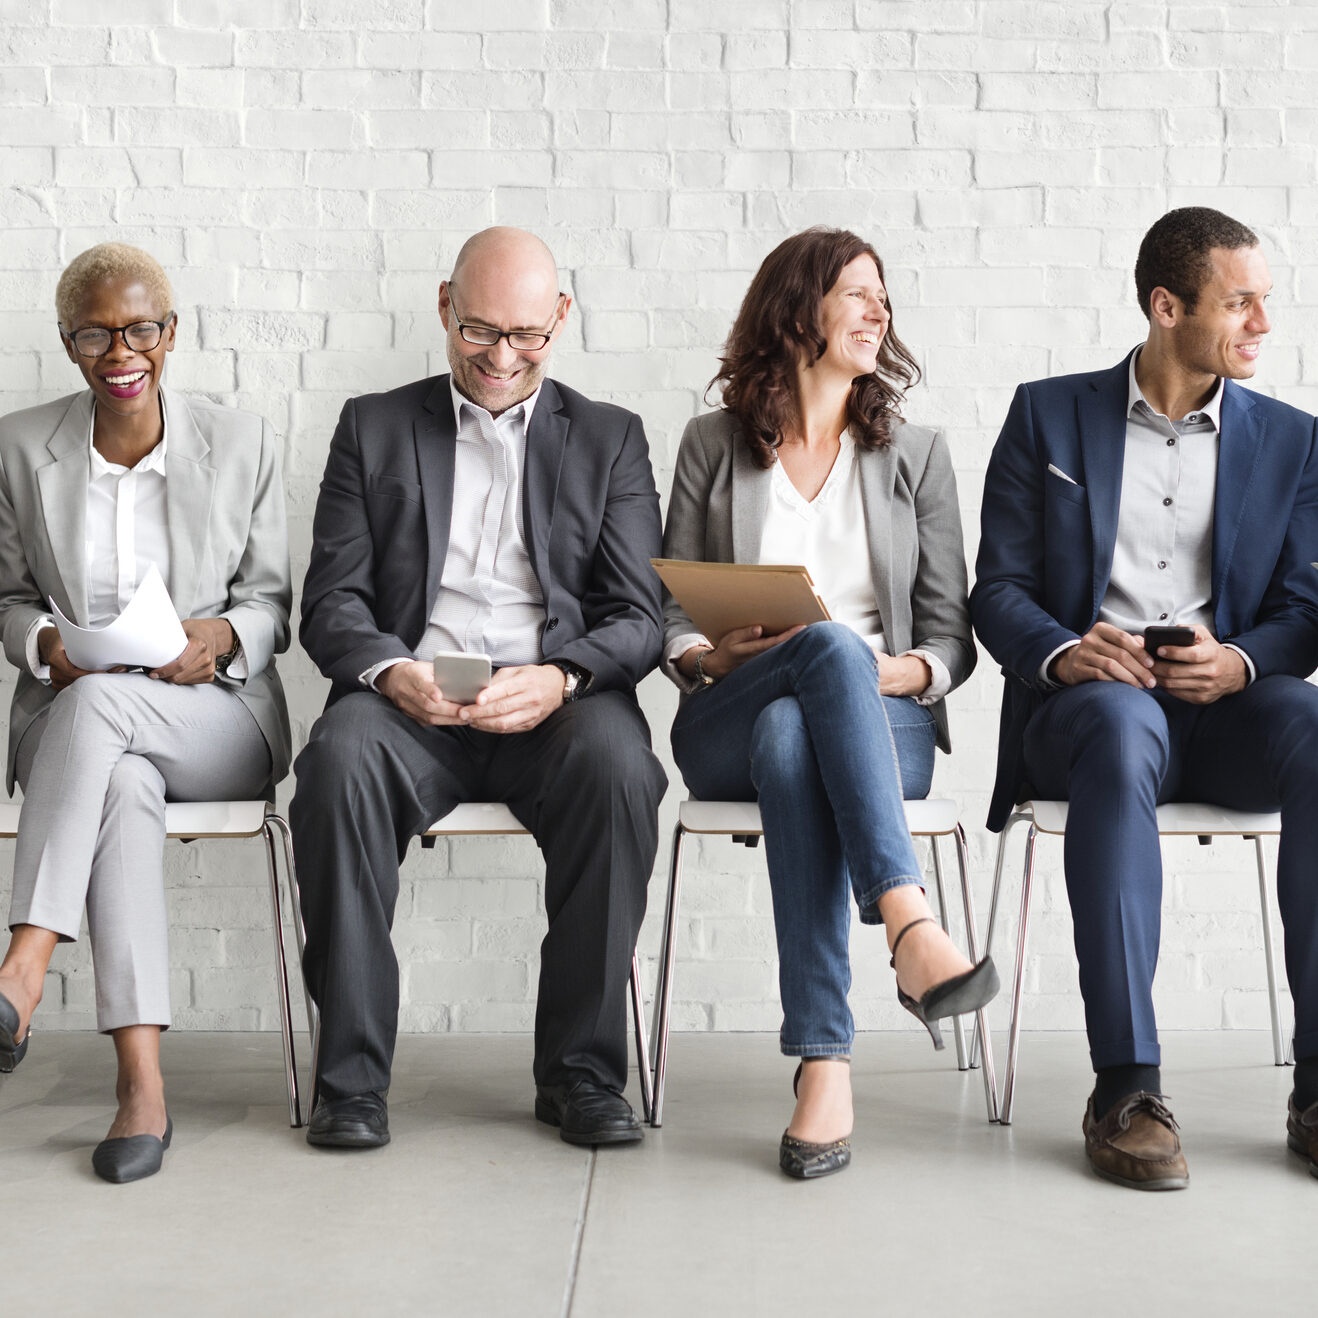 Group of diverse people are waiting for a job interview